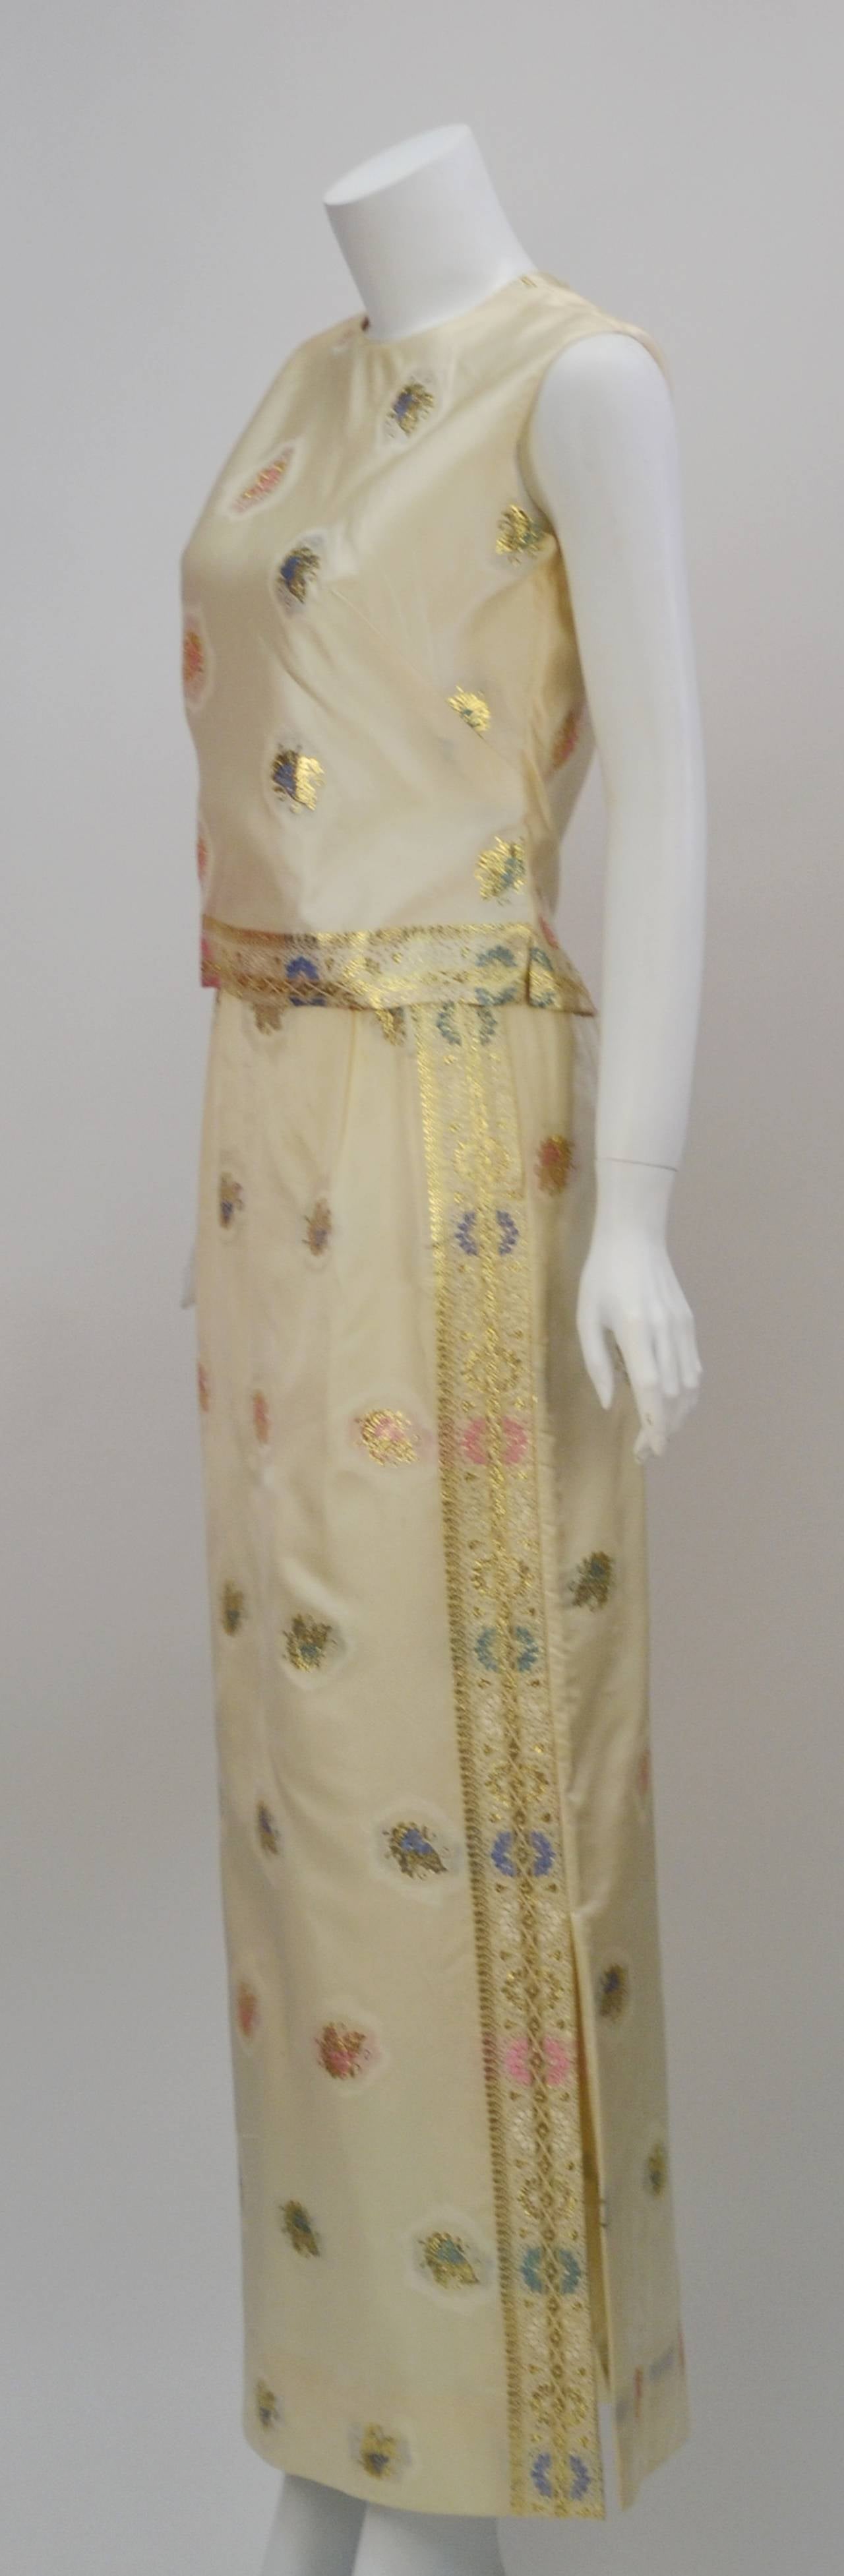 This 1960's sleeveless Asian inspired ensemble is perfect for any luncheon or can be worn at evening!  The item's fabric content is not listed but appears to be silk.  The ensemble boasts a colorful floral motif with woven gold metallic threads atop